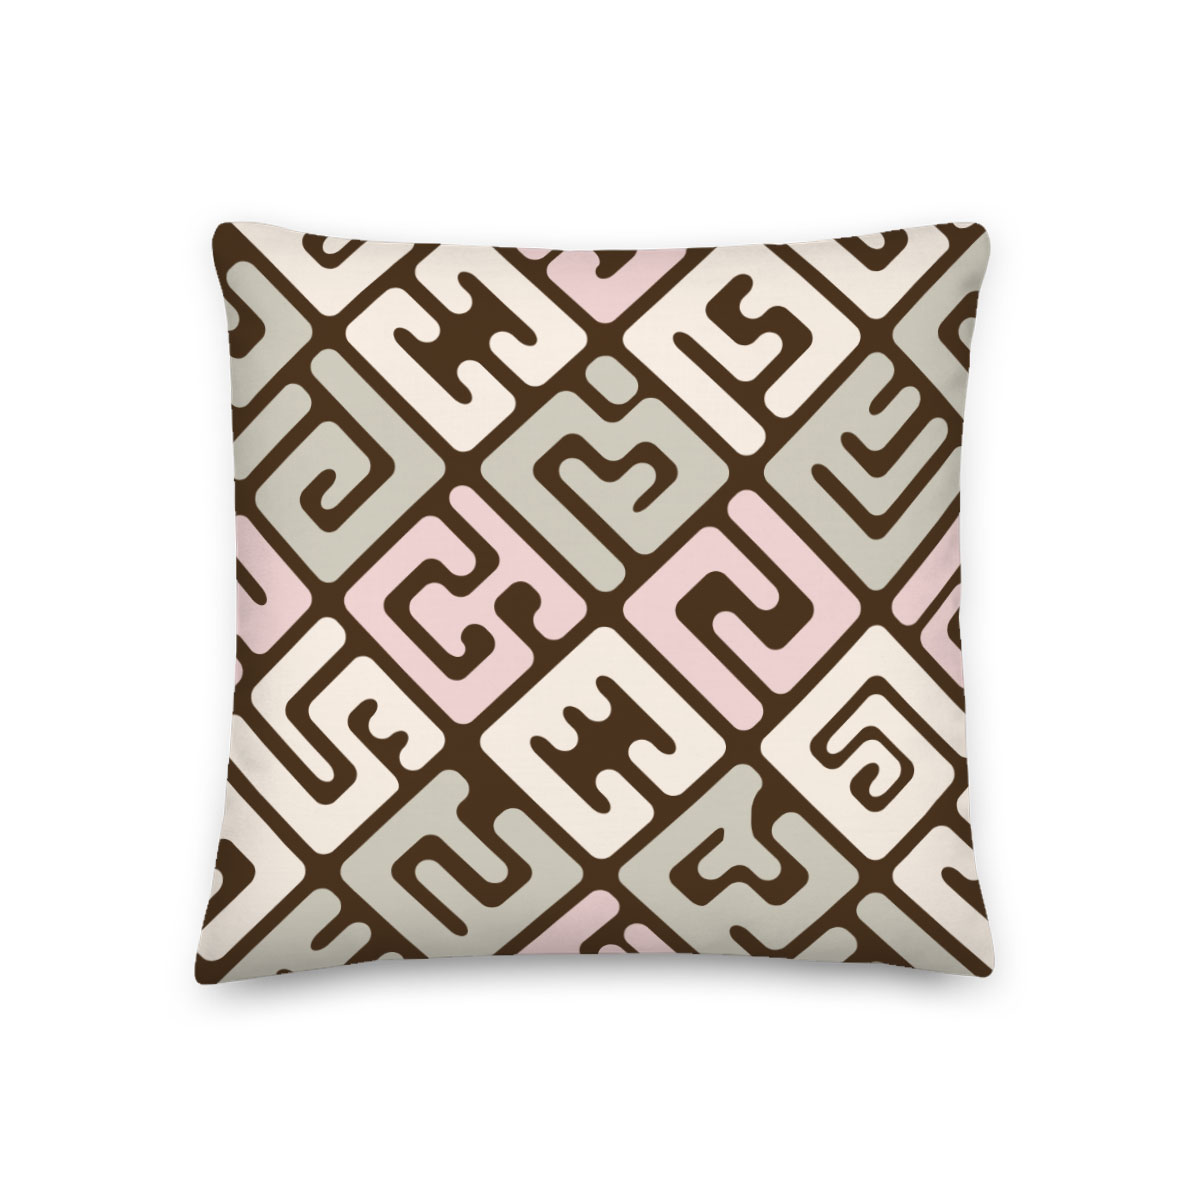 Modern Kuba – square throw pillow in earthtones and pink